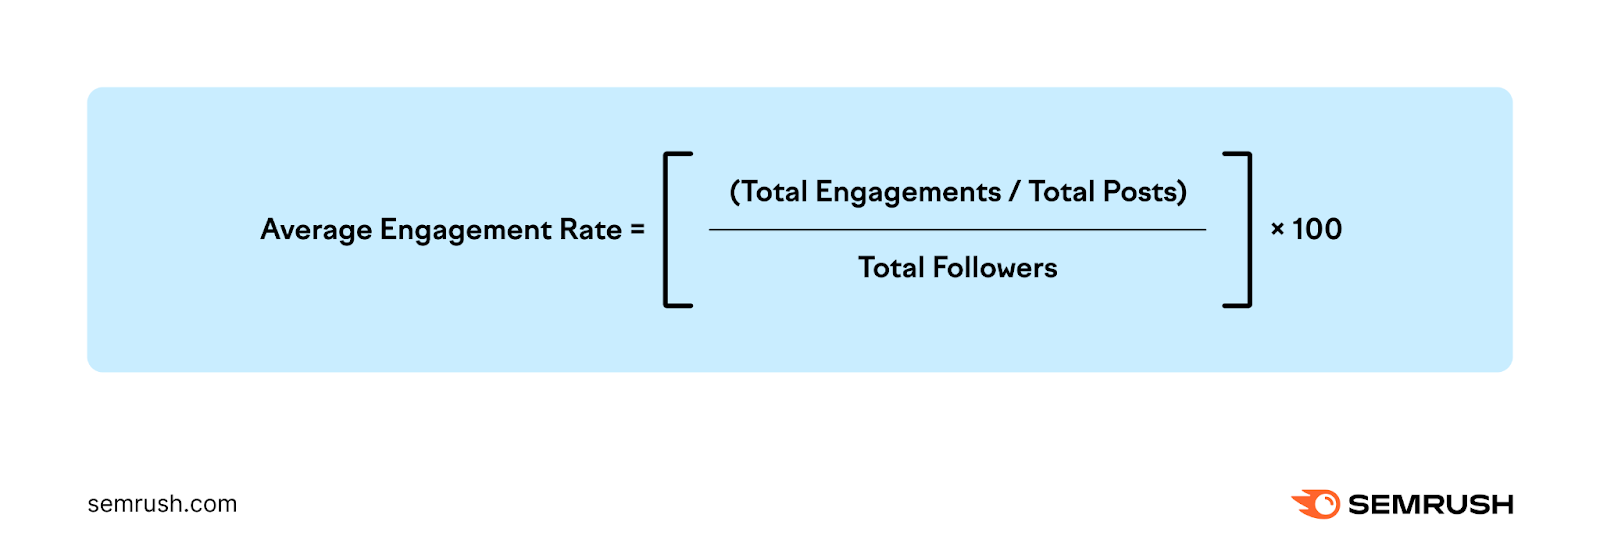 an image s،wing a formula for ،w the average engagement rate is calculated